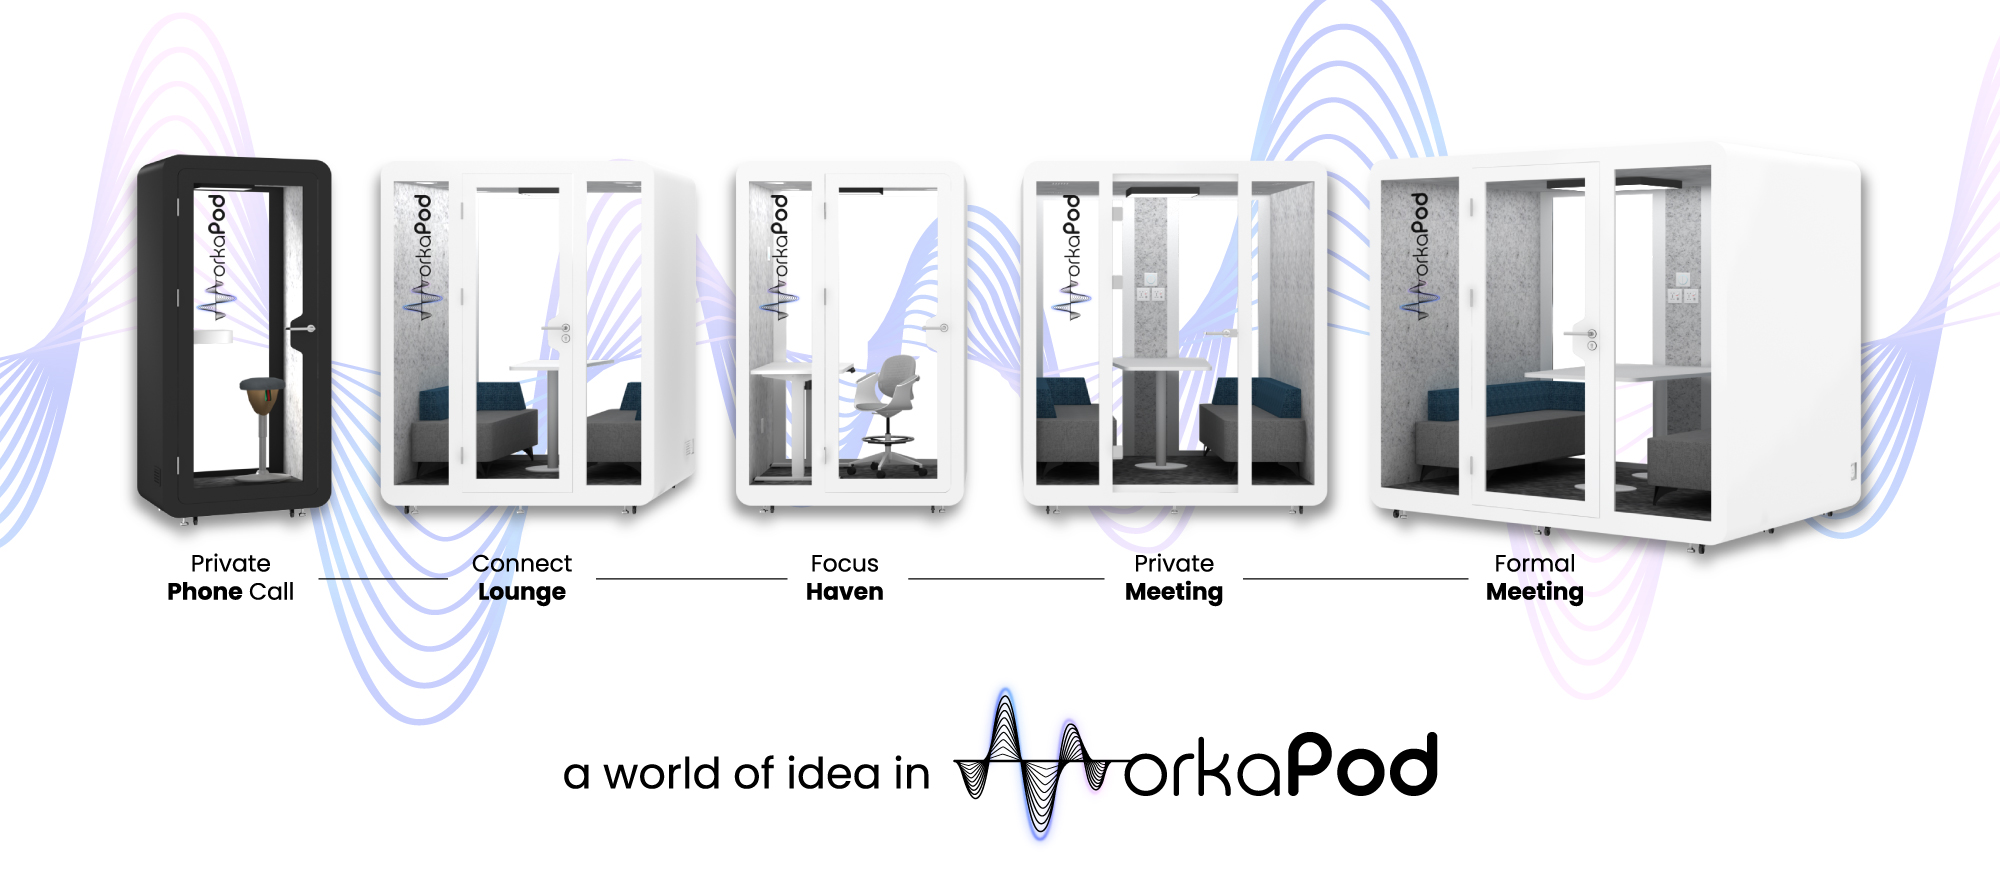 WorkaPod-acoustic-phone-booth-pod-for-private-phone-call,-meeting-interview-space-and-focus-work